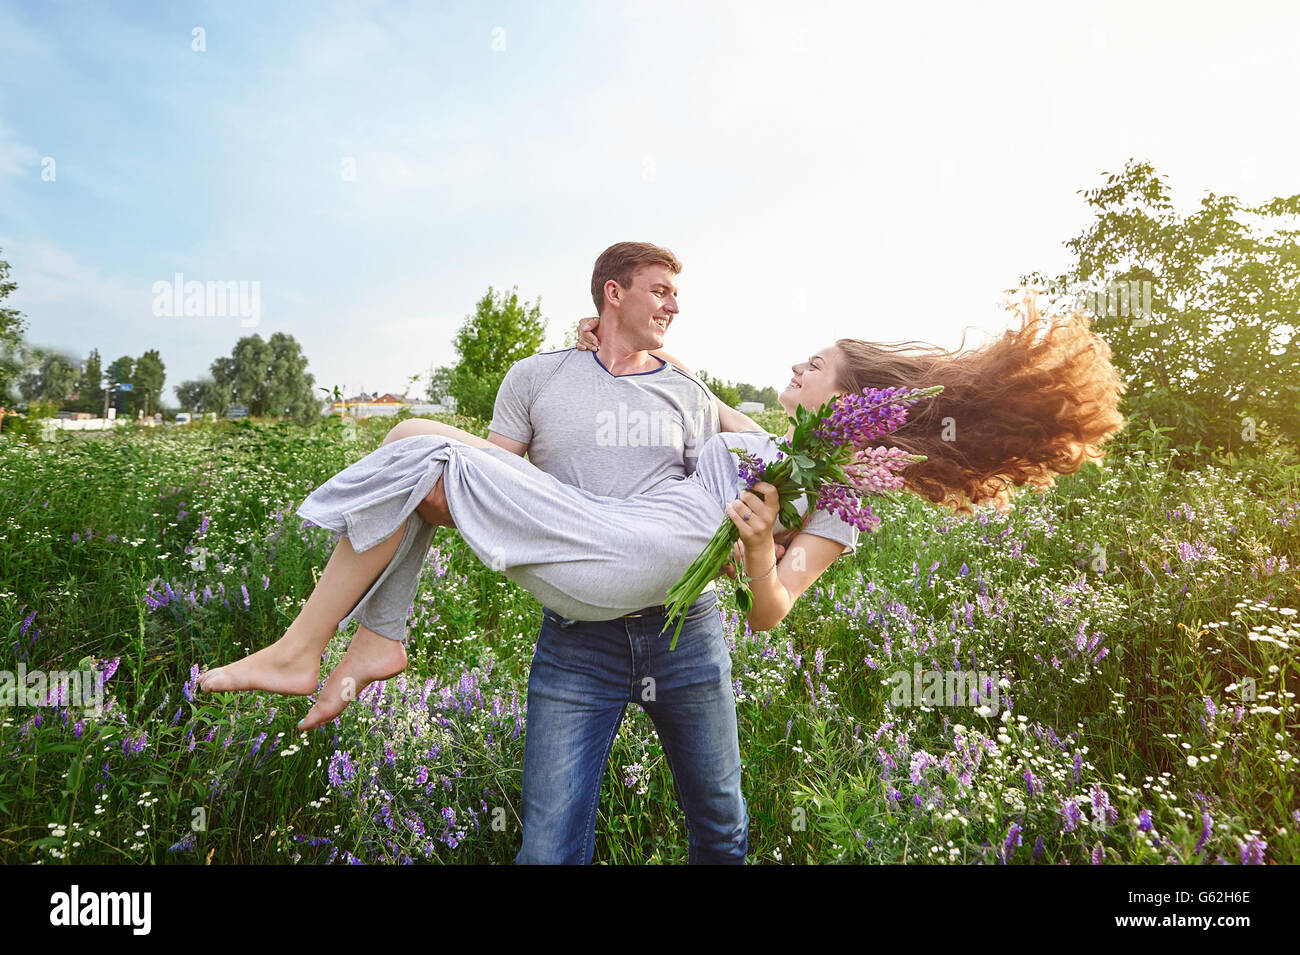 Happy love man holding a woman on his arms in field Stock Photo